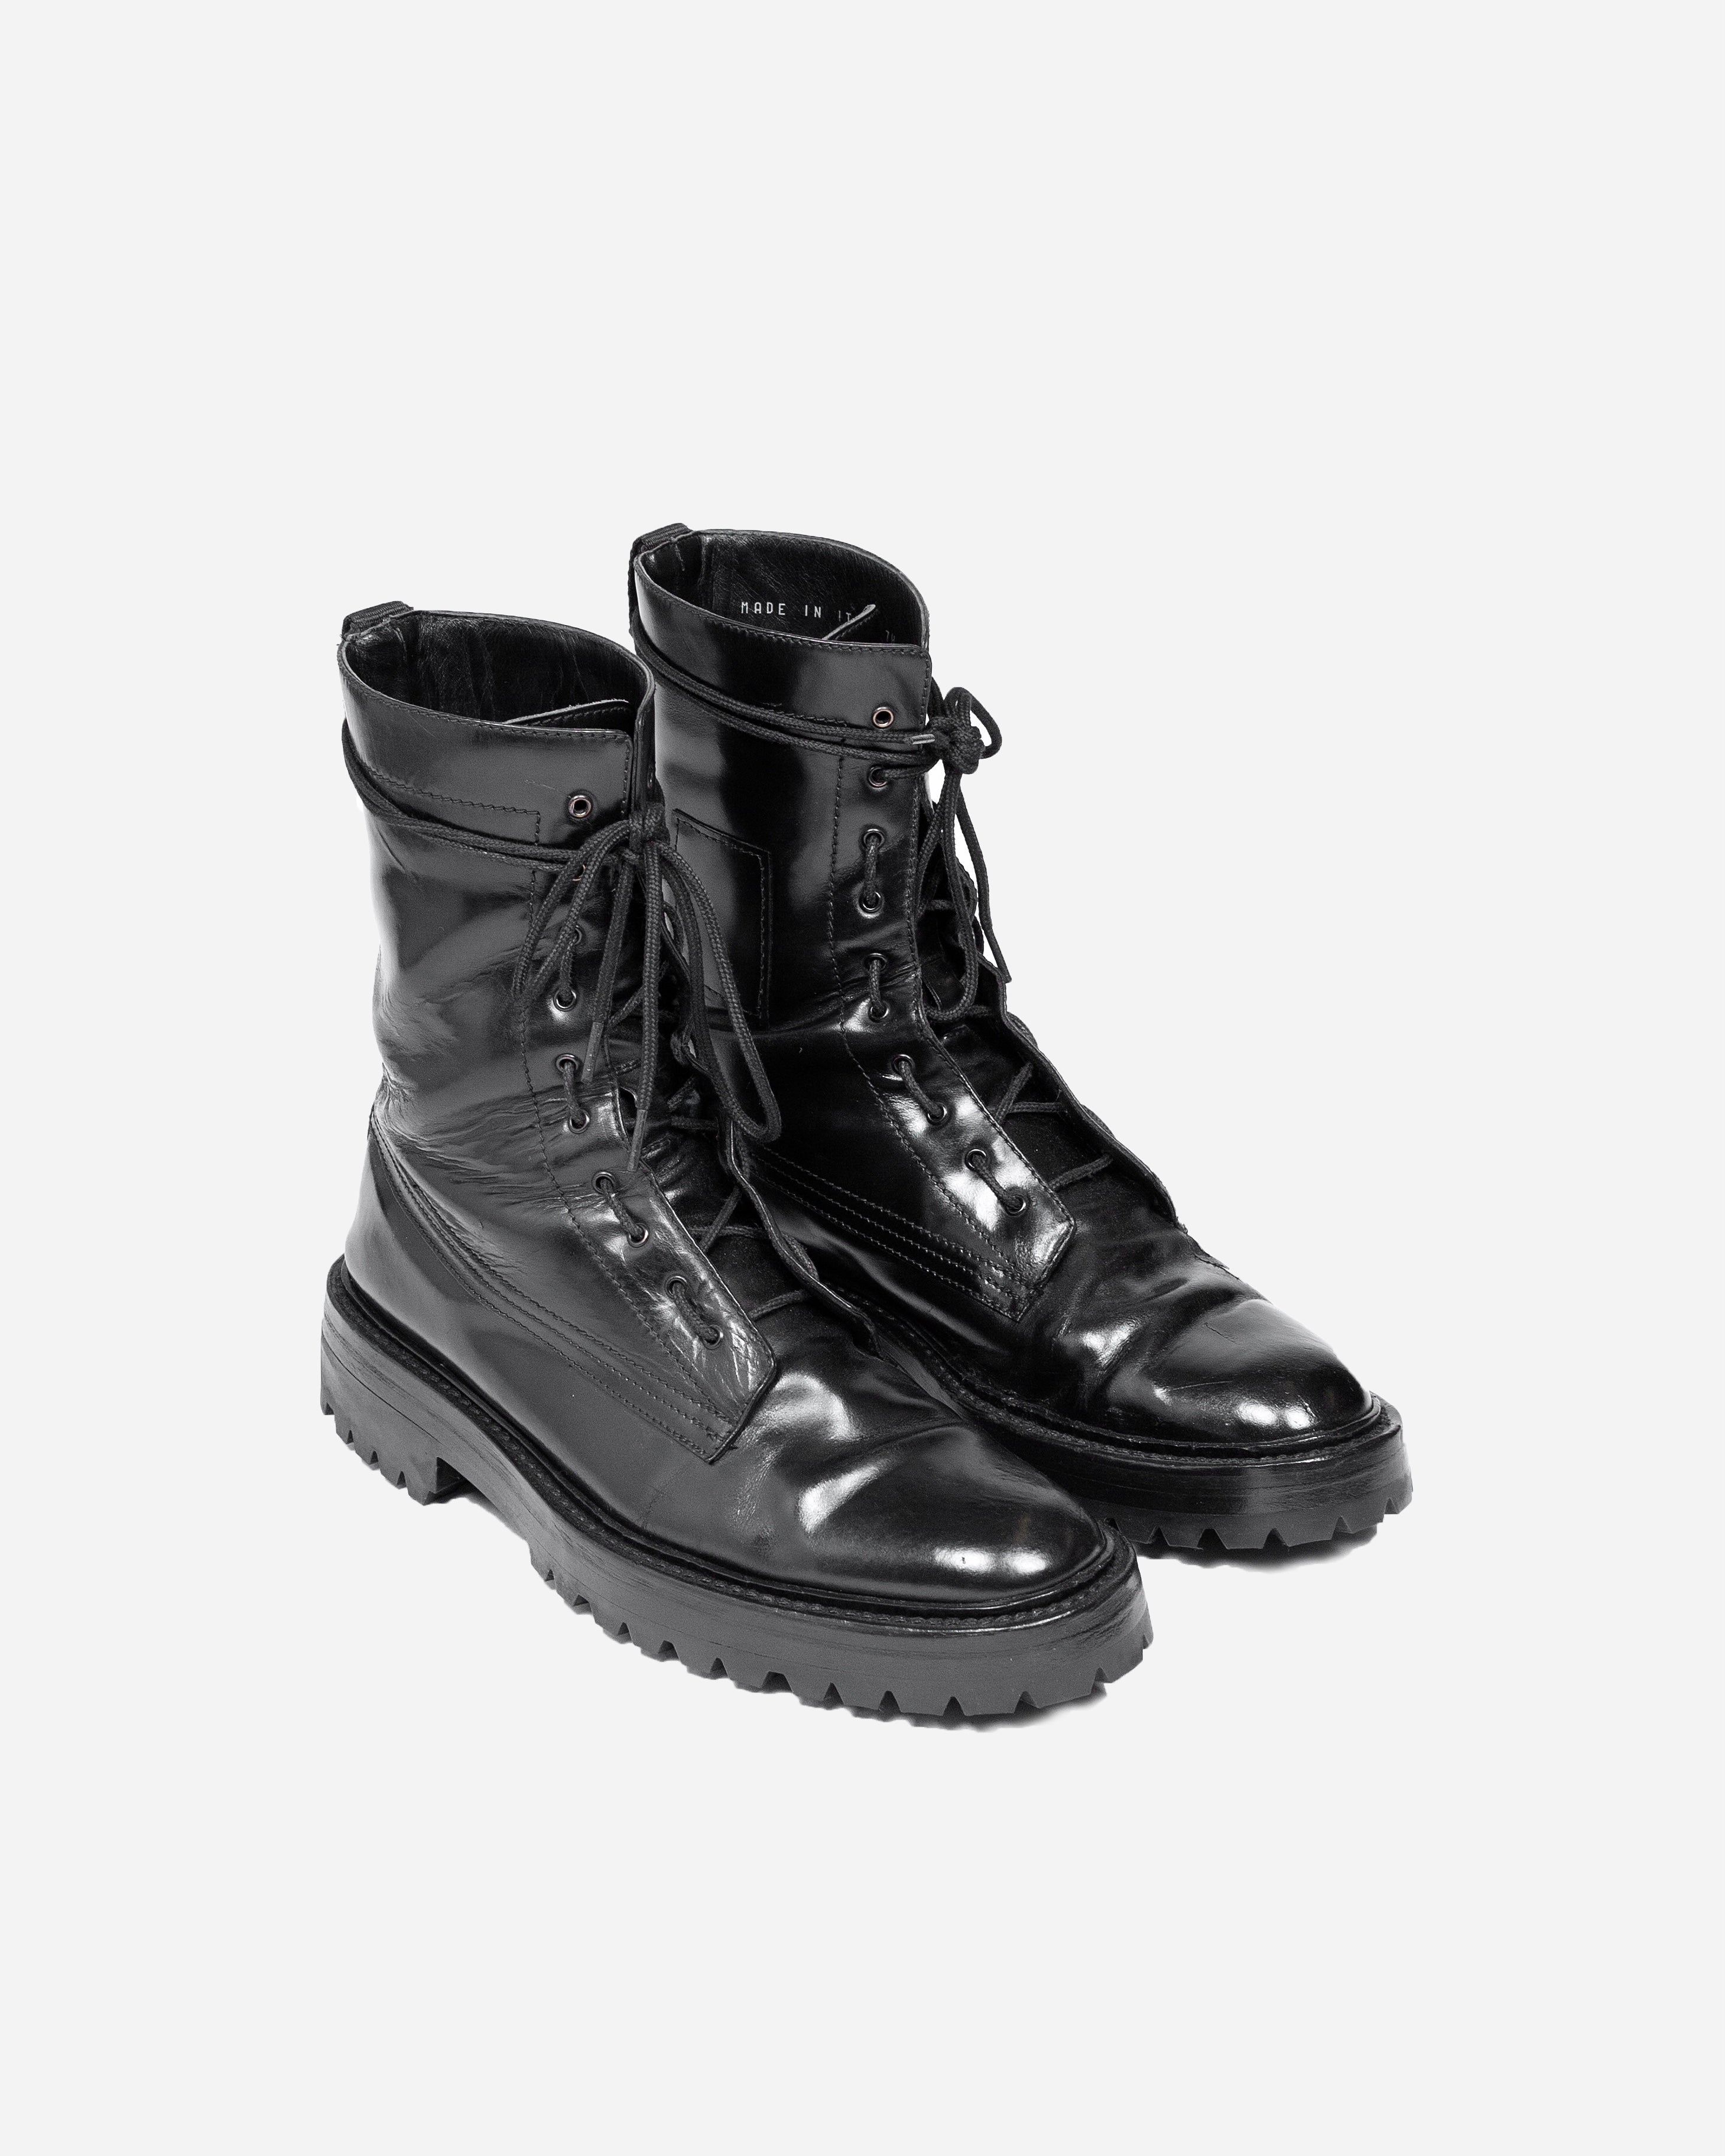 Dior Homme Patent Leather Combat Boots - AW07 “Navigate” - SILVER